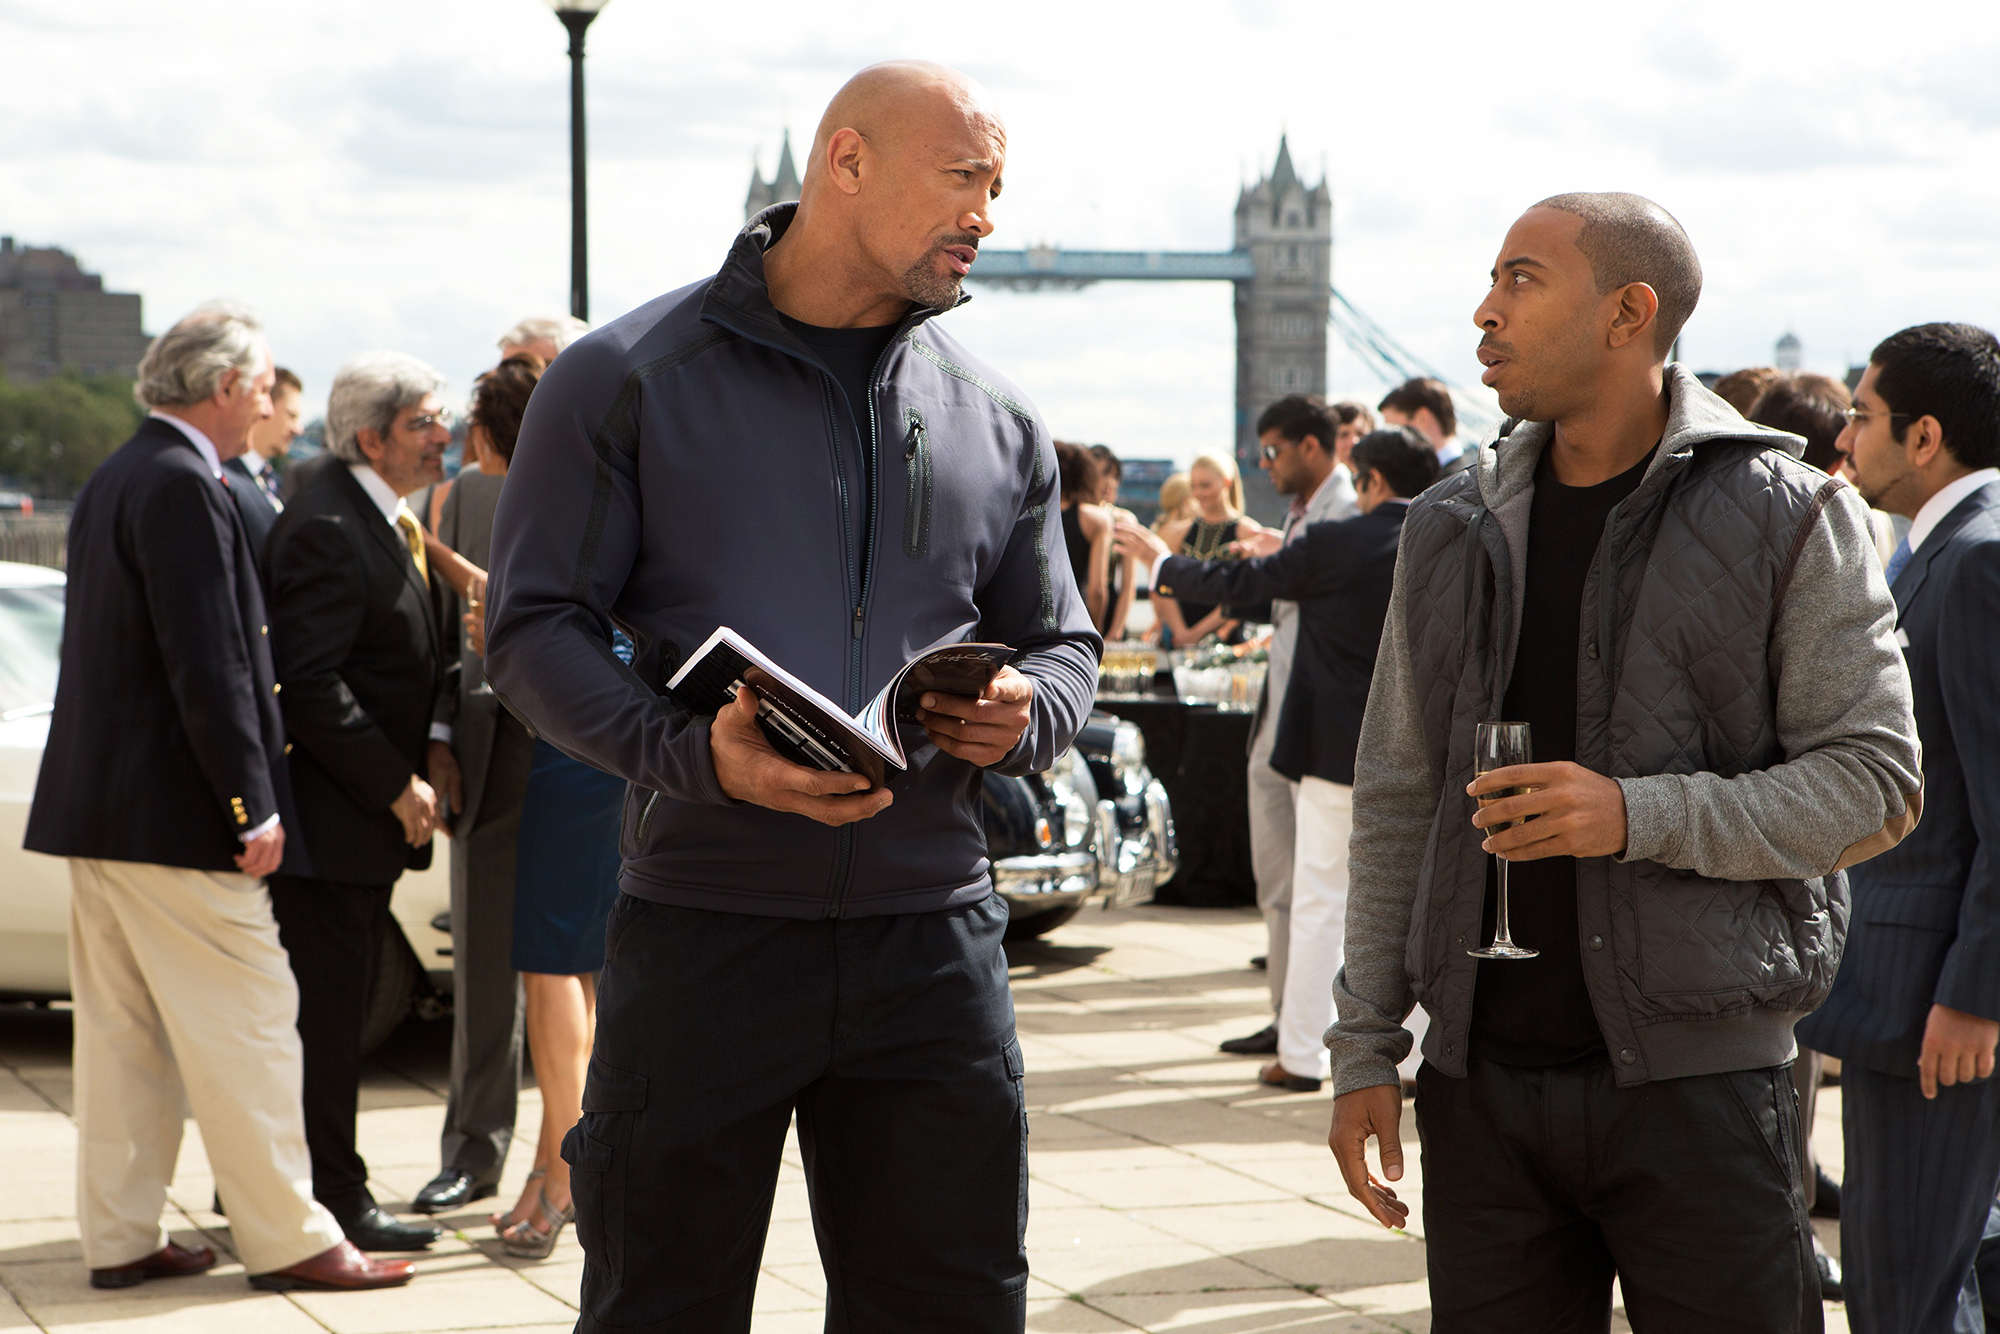 Johnson as Luke Hobbs and Ludacris as Tej Parker in Fast &amp; Furious 6 in 2013.